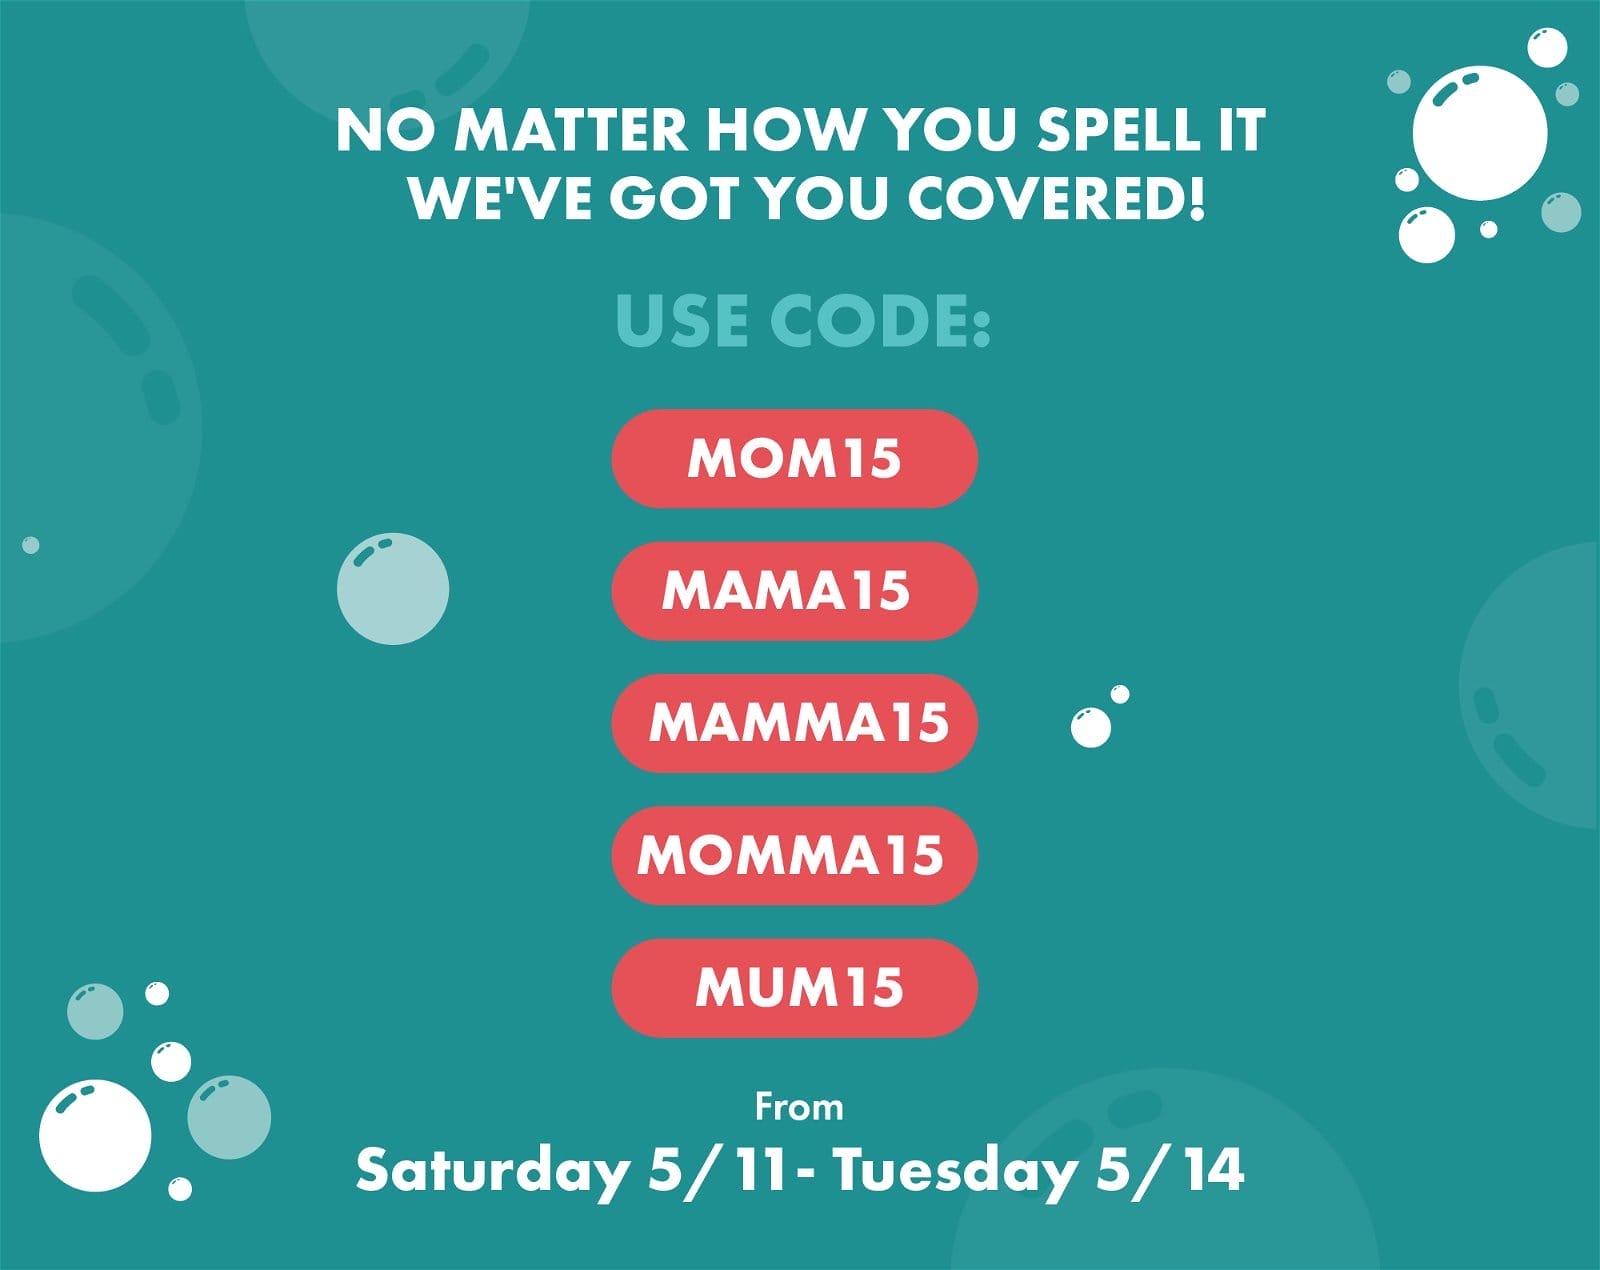 USE CODE: MAMA15 From Saturday 5/11 - Tuesday 5/14